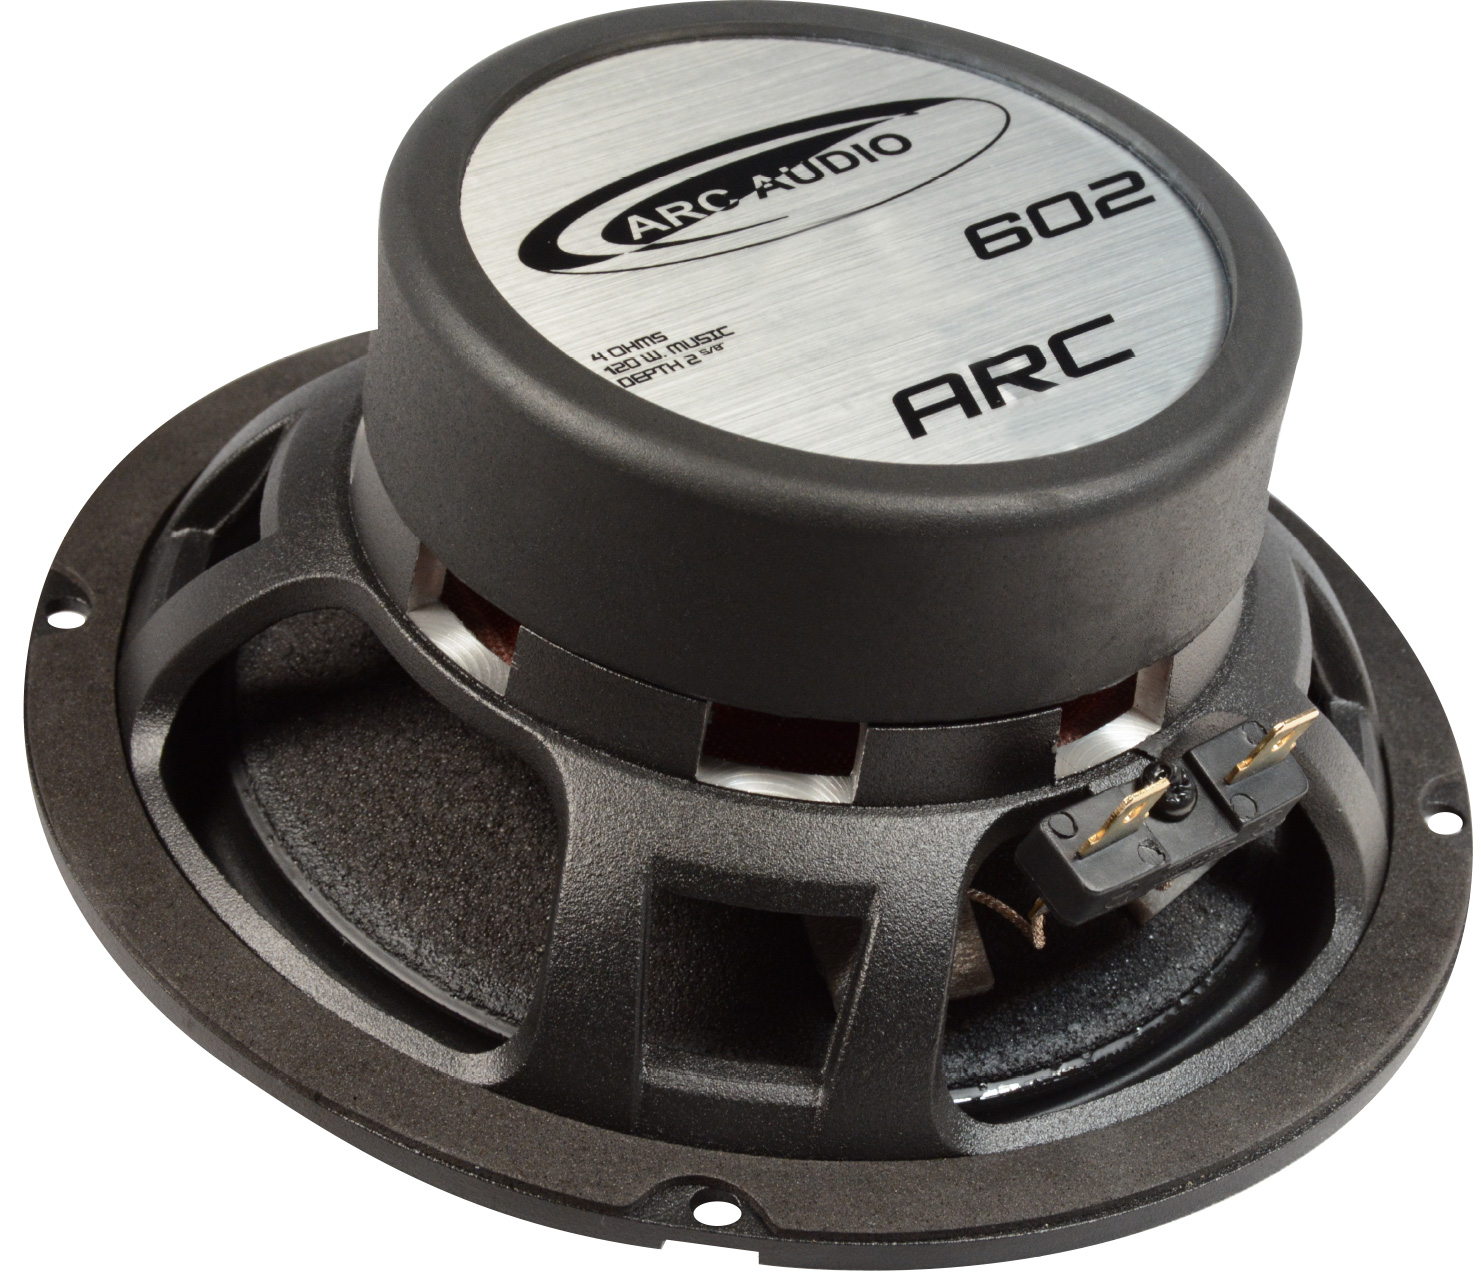 ARC602 Coaxial Speaker Review